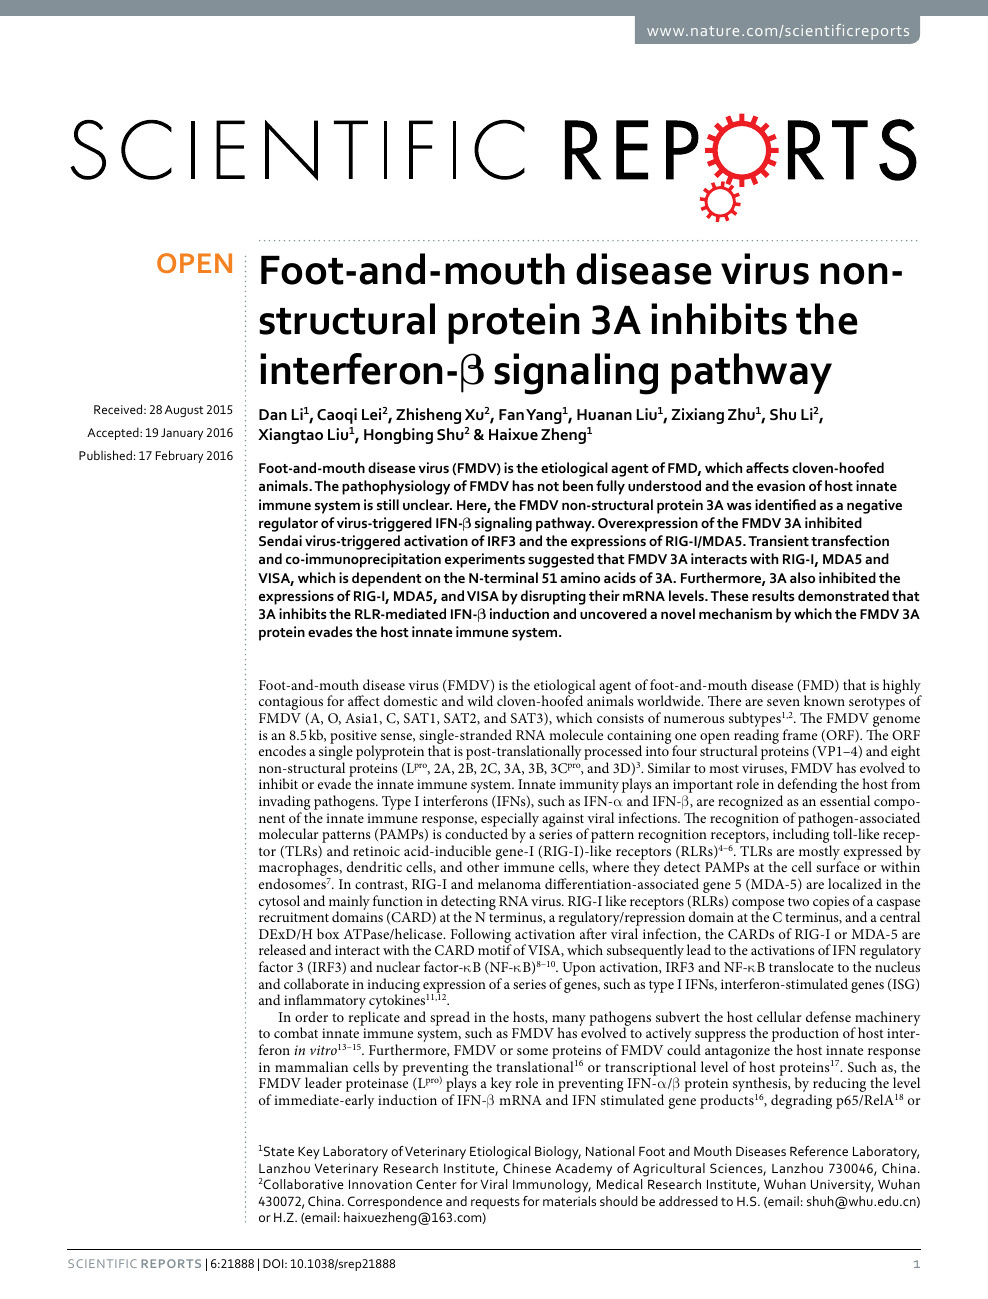 Foot And Mouth Disease Virus Non Structural Protein 3a Inhibits The Interferon B Signaling Pathway Topic Of Research Paper In Biological Sciences Download Scholarly Article Pdf And Read For Free On Cyberleninka Open Science Hub